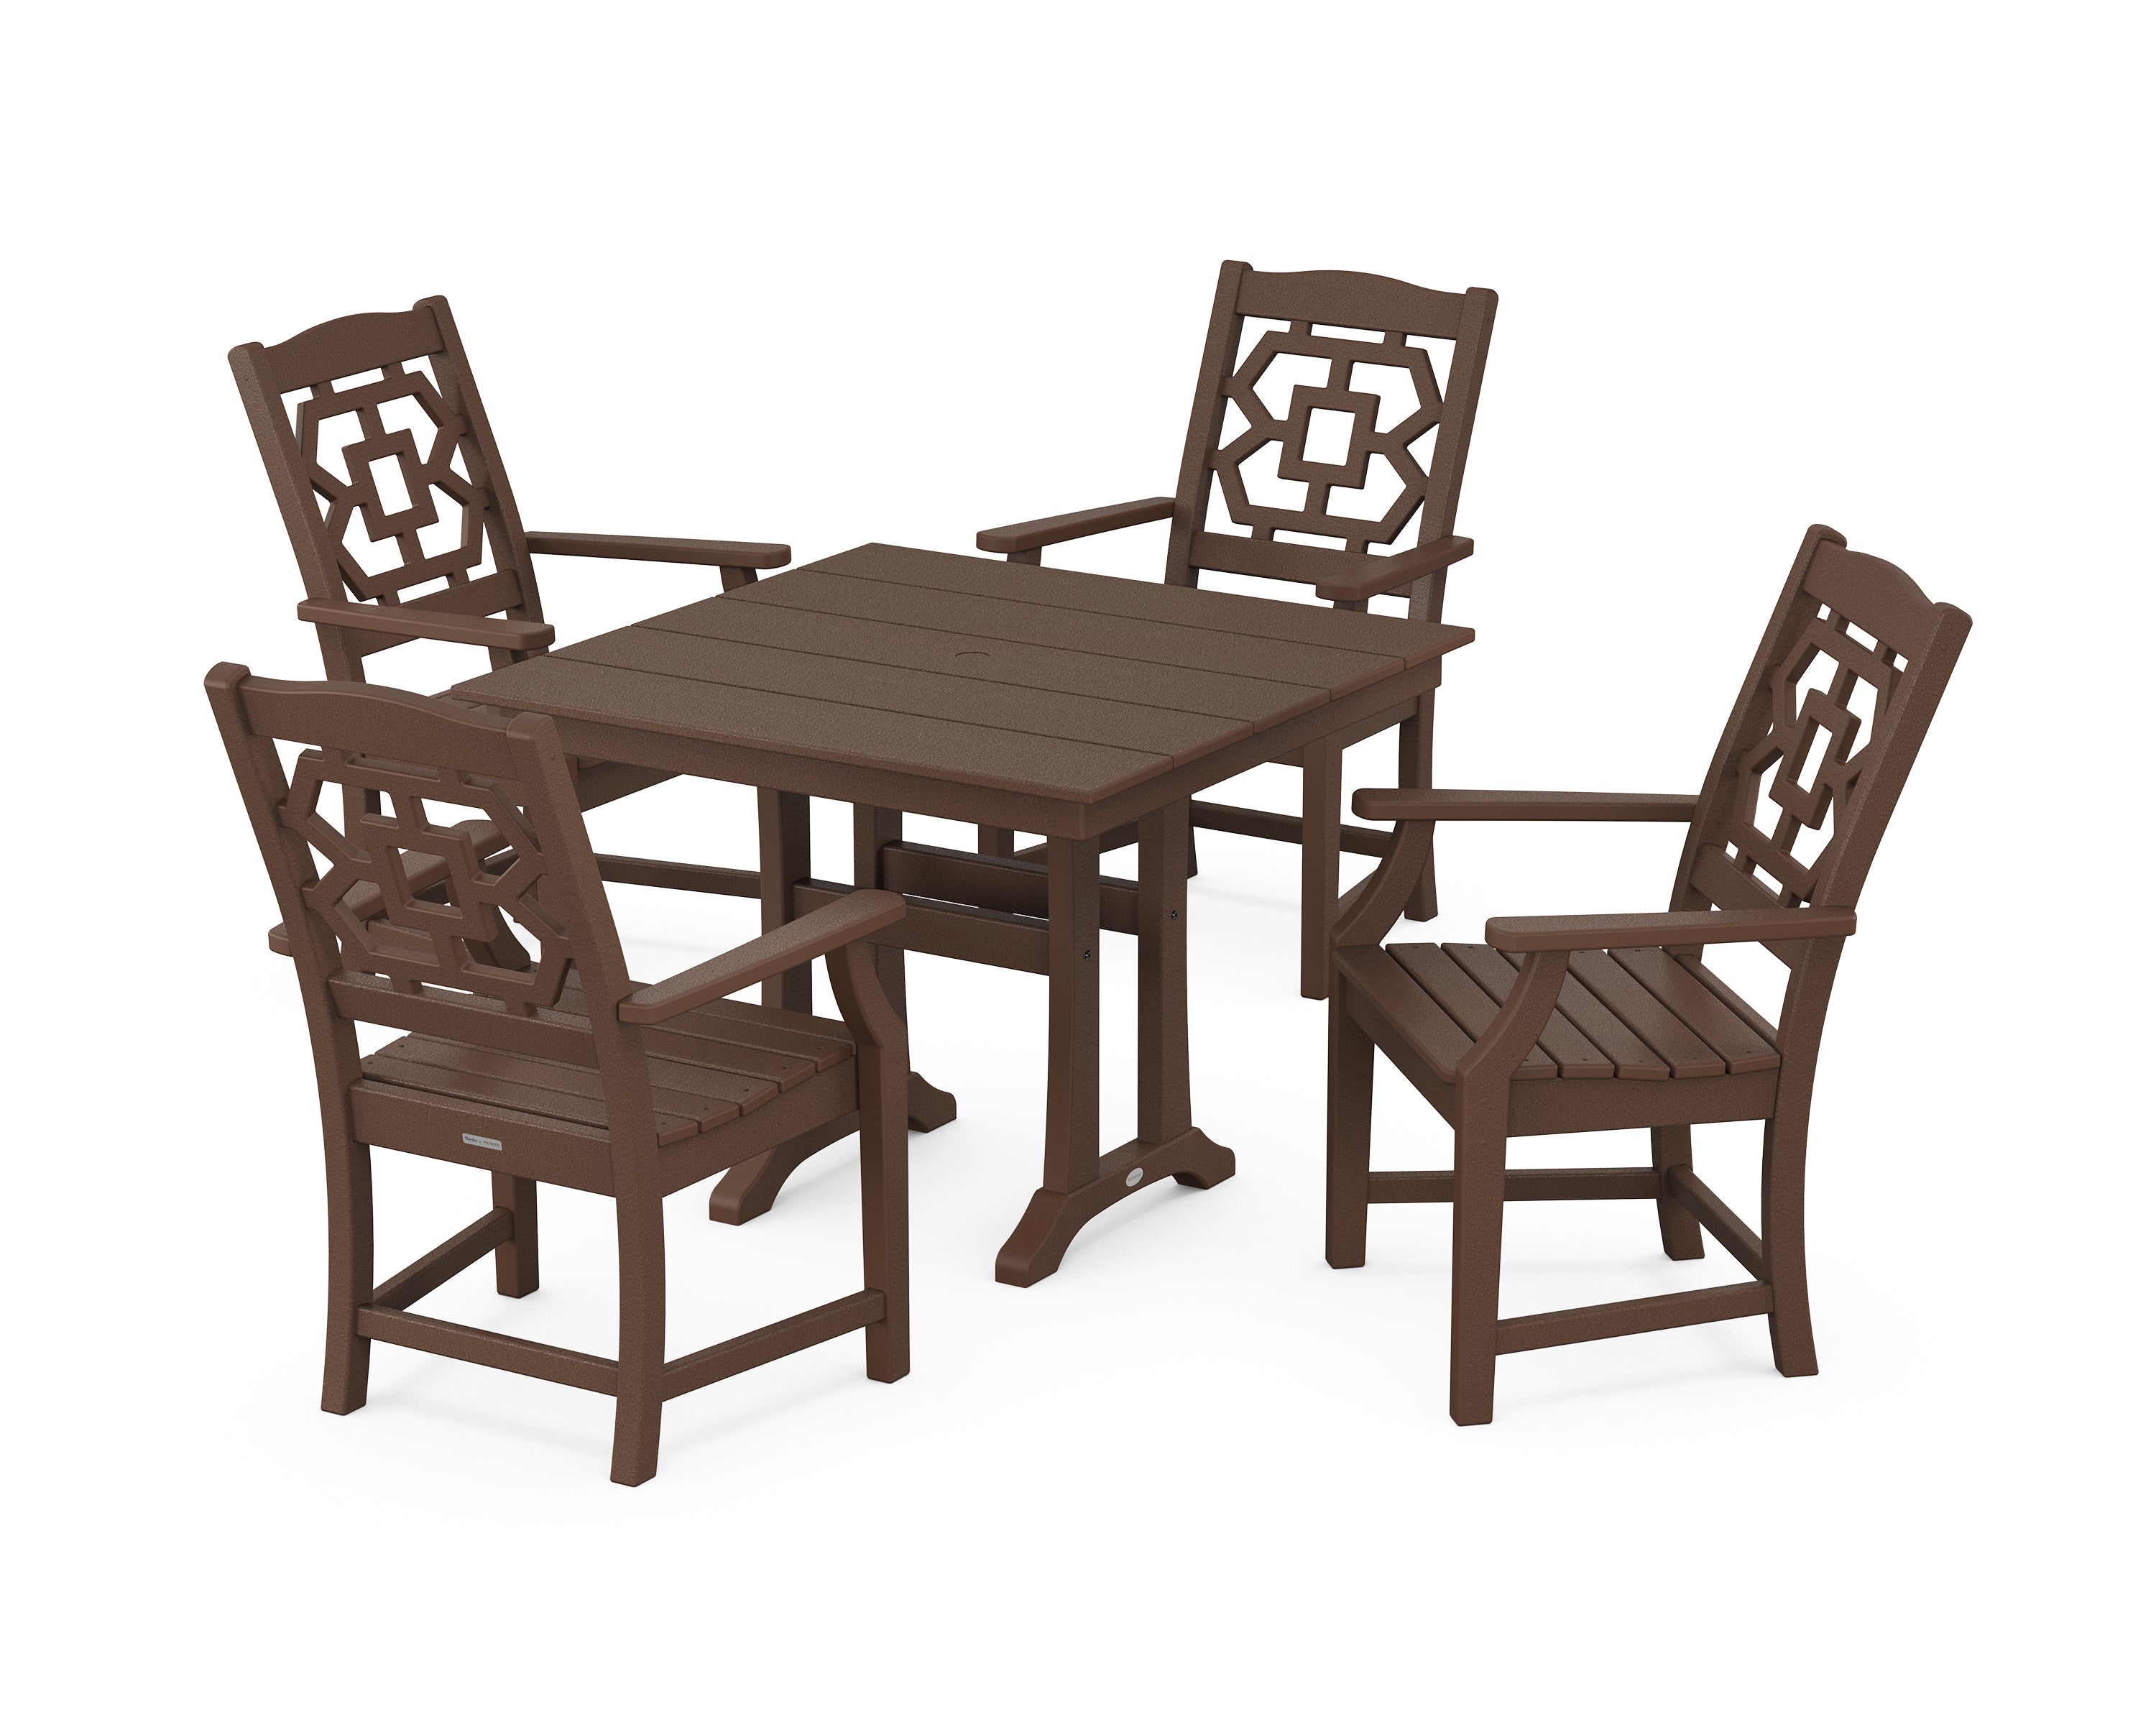 Martha Stewart by POLYWOOD® Chinoiserie 5-Piece Farmhouse Dining Set with Trestle Legs in Mahogany